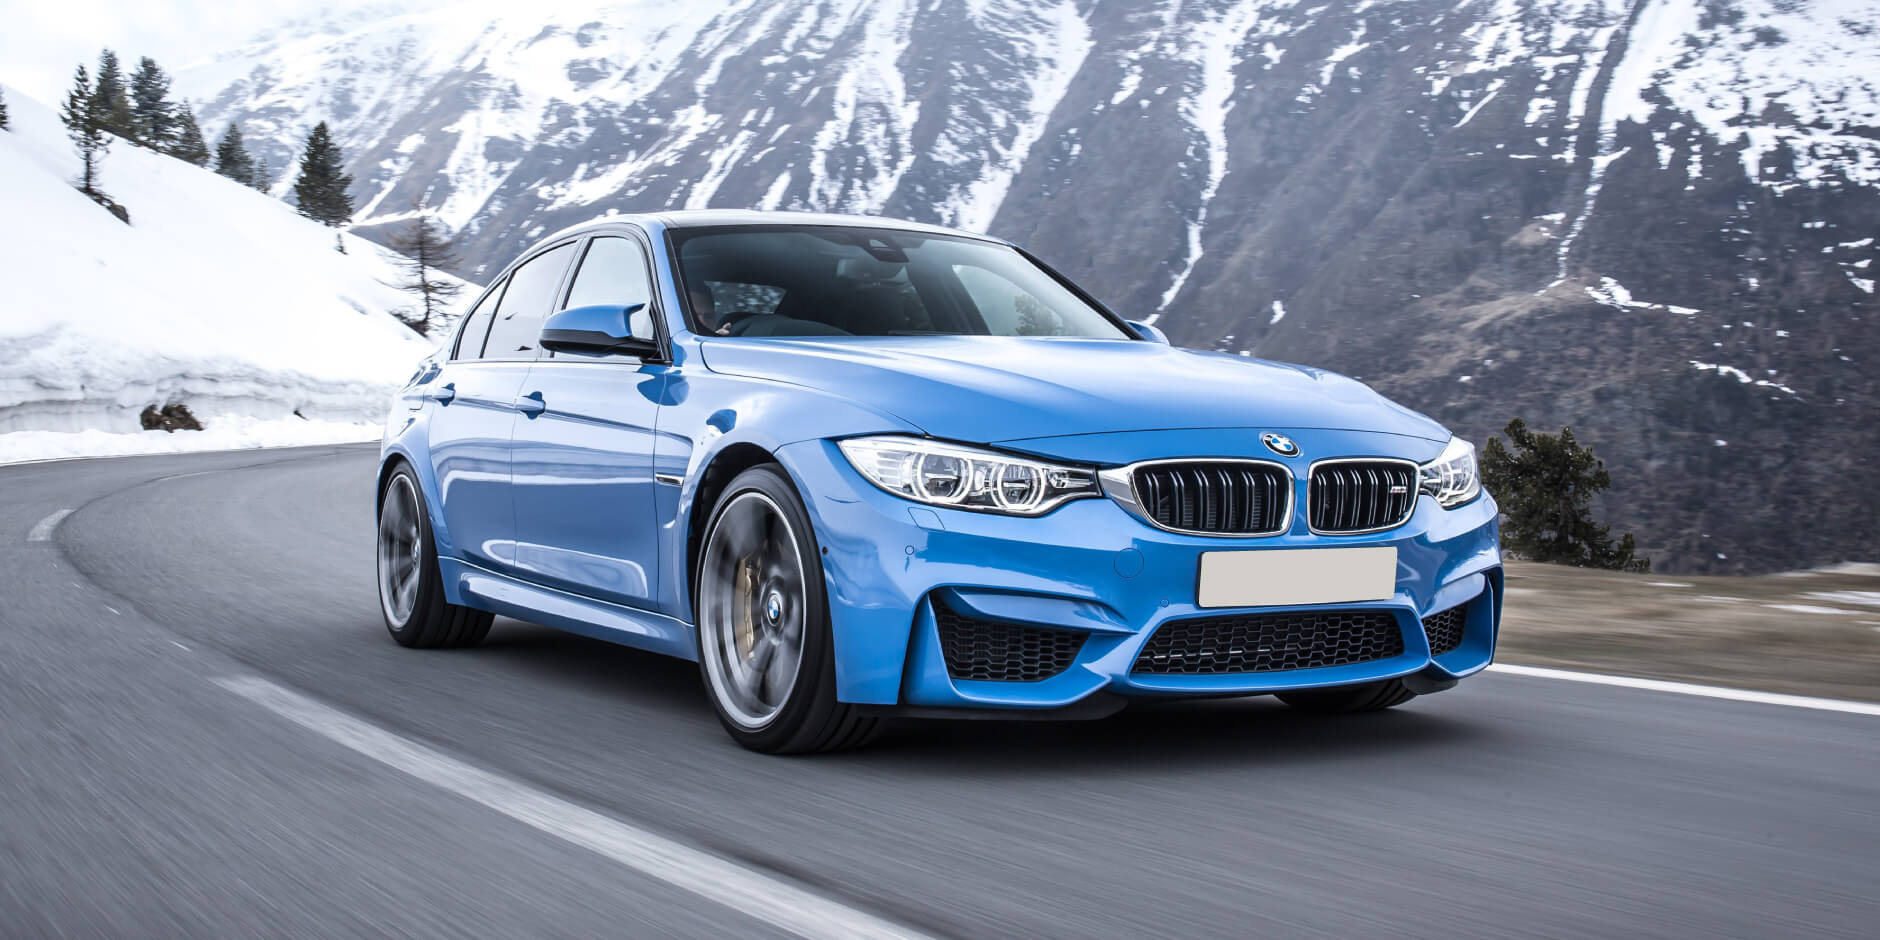 Exploring the Thrill: What Makes the BMW M Series the Ultimate UK Driving Experience?